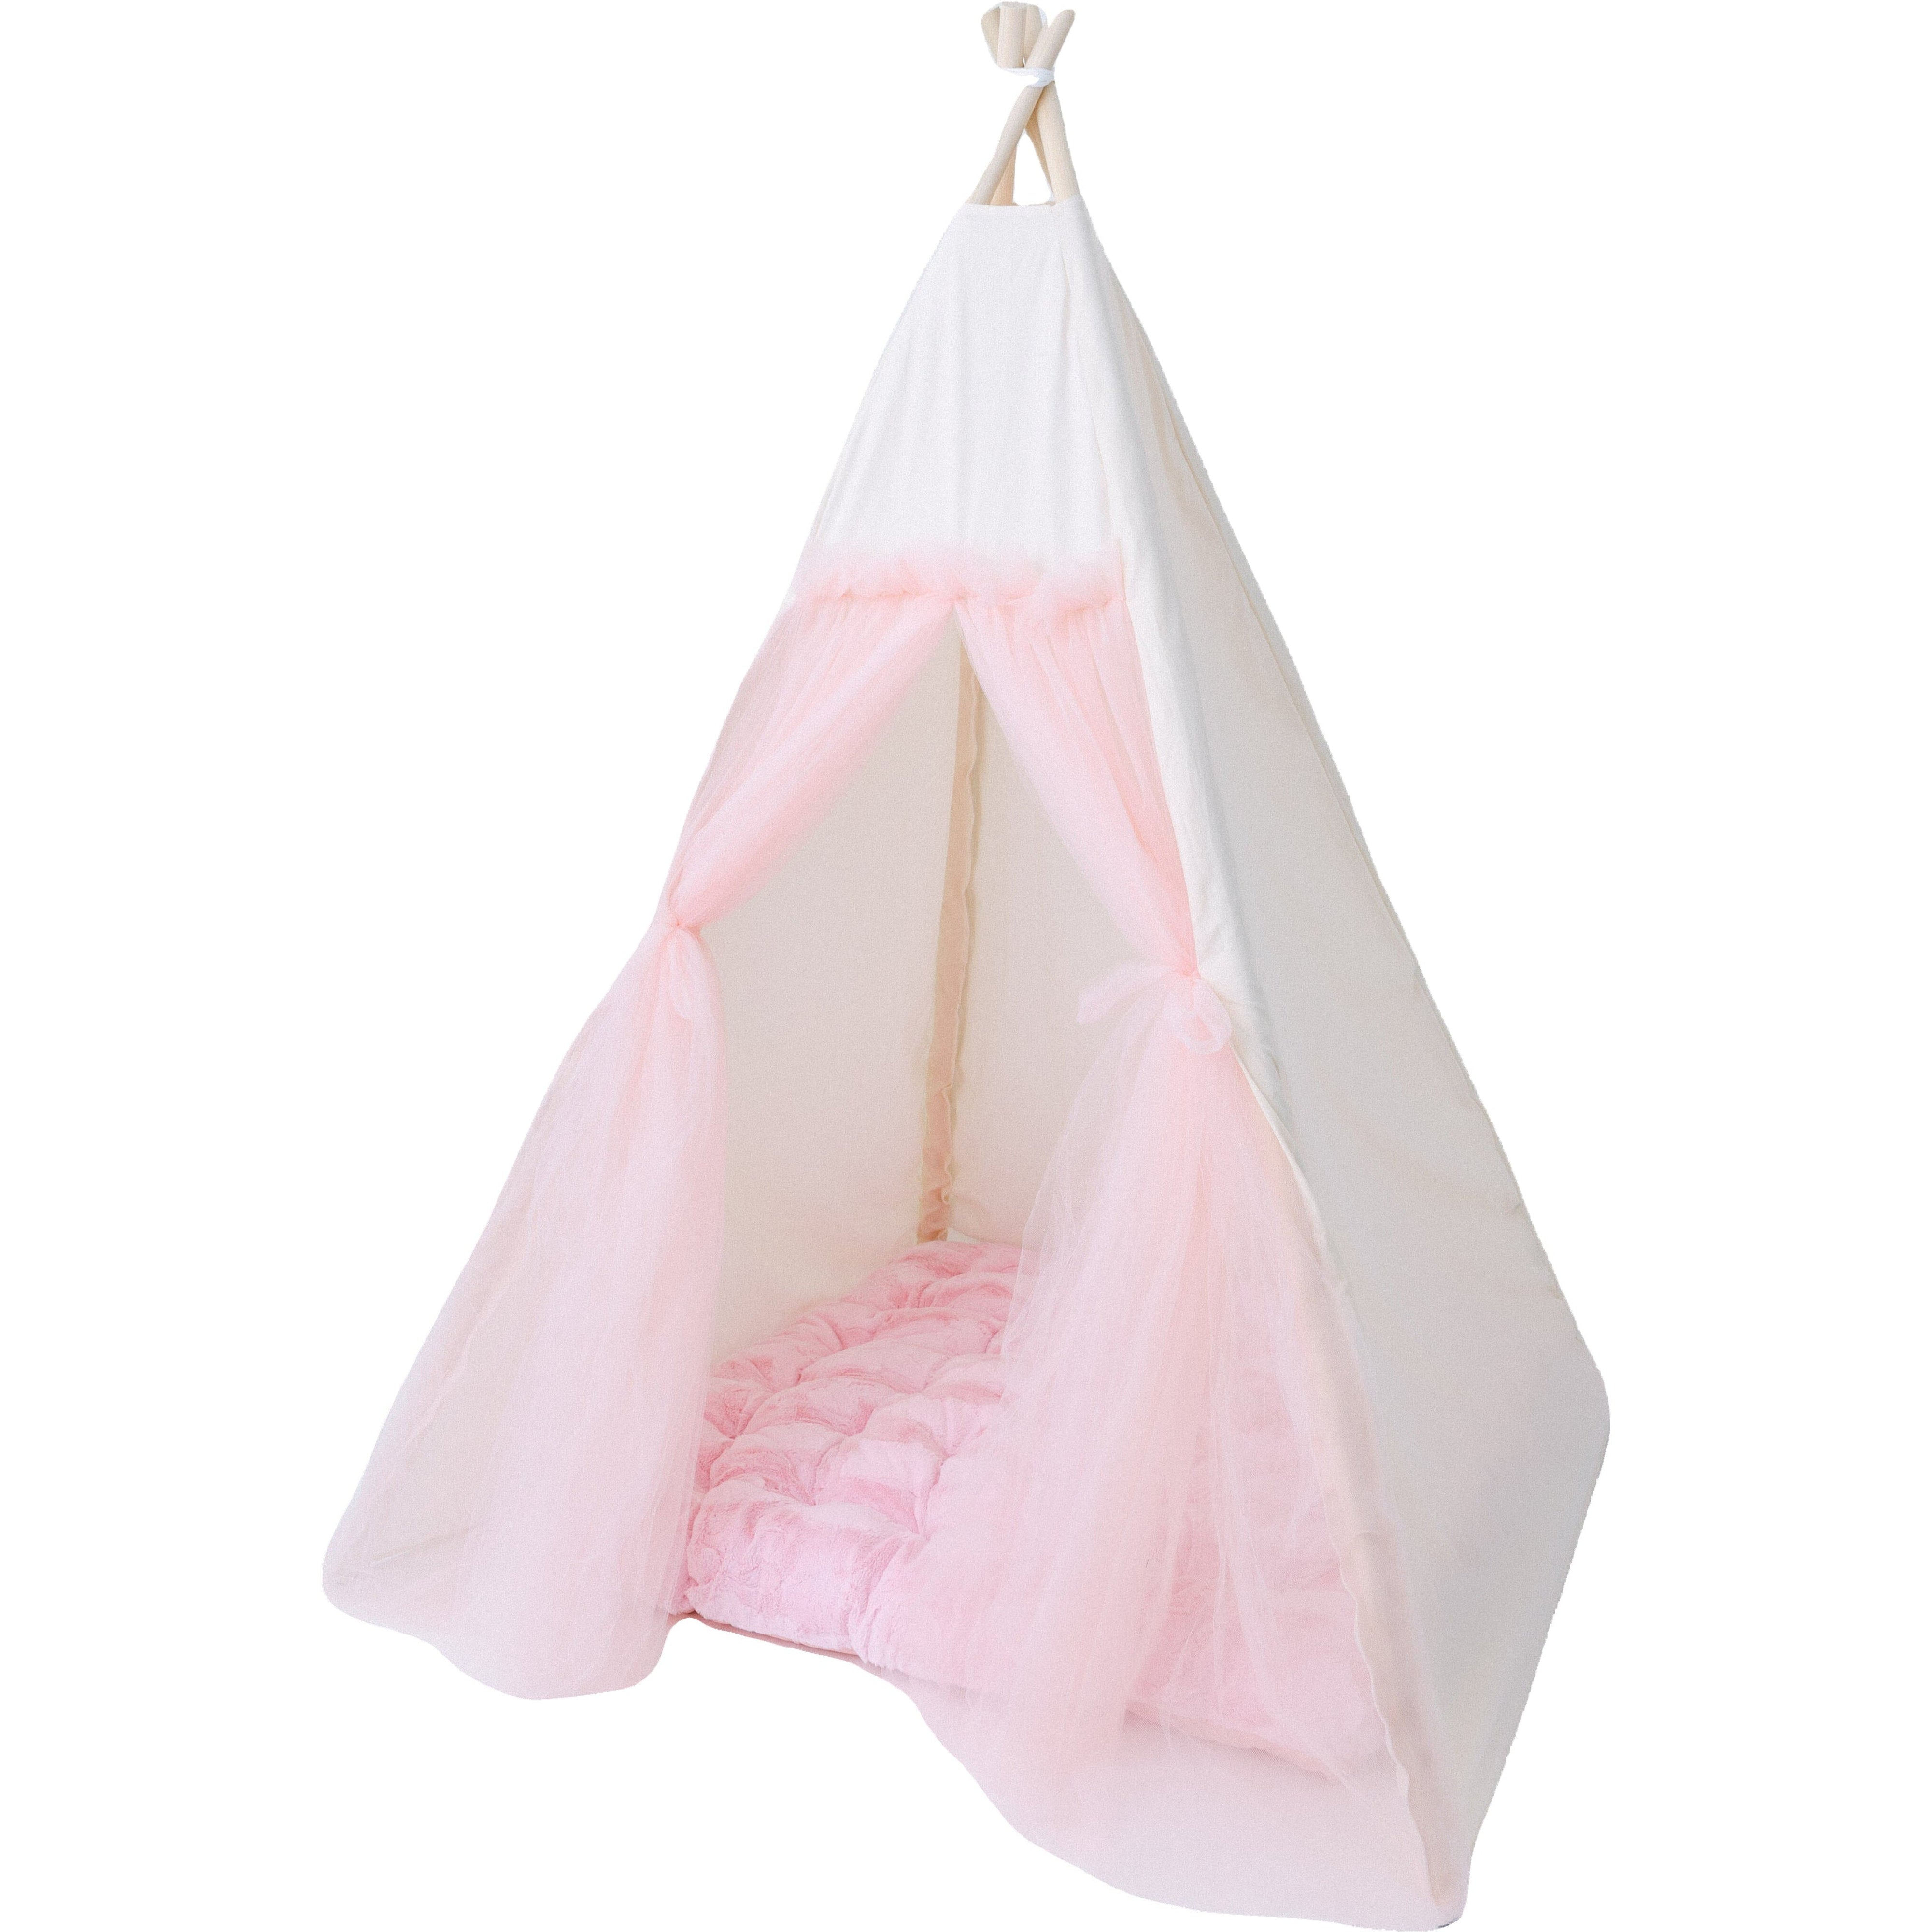 The Angelina Play Tent